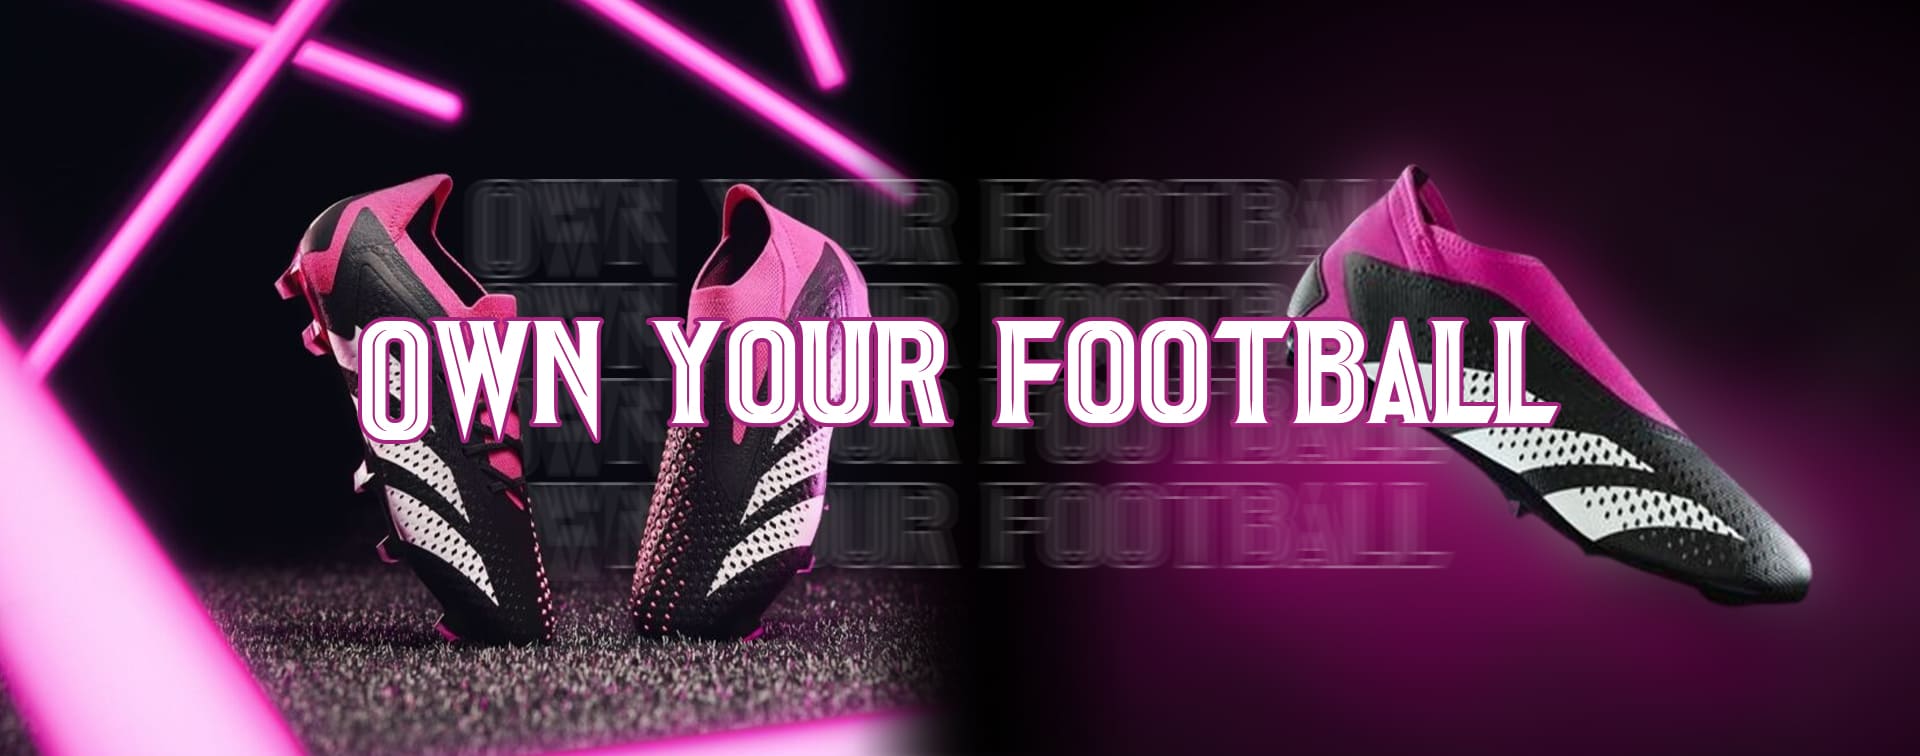 Adidas Own your football